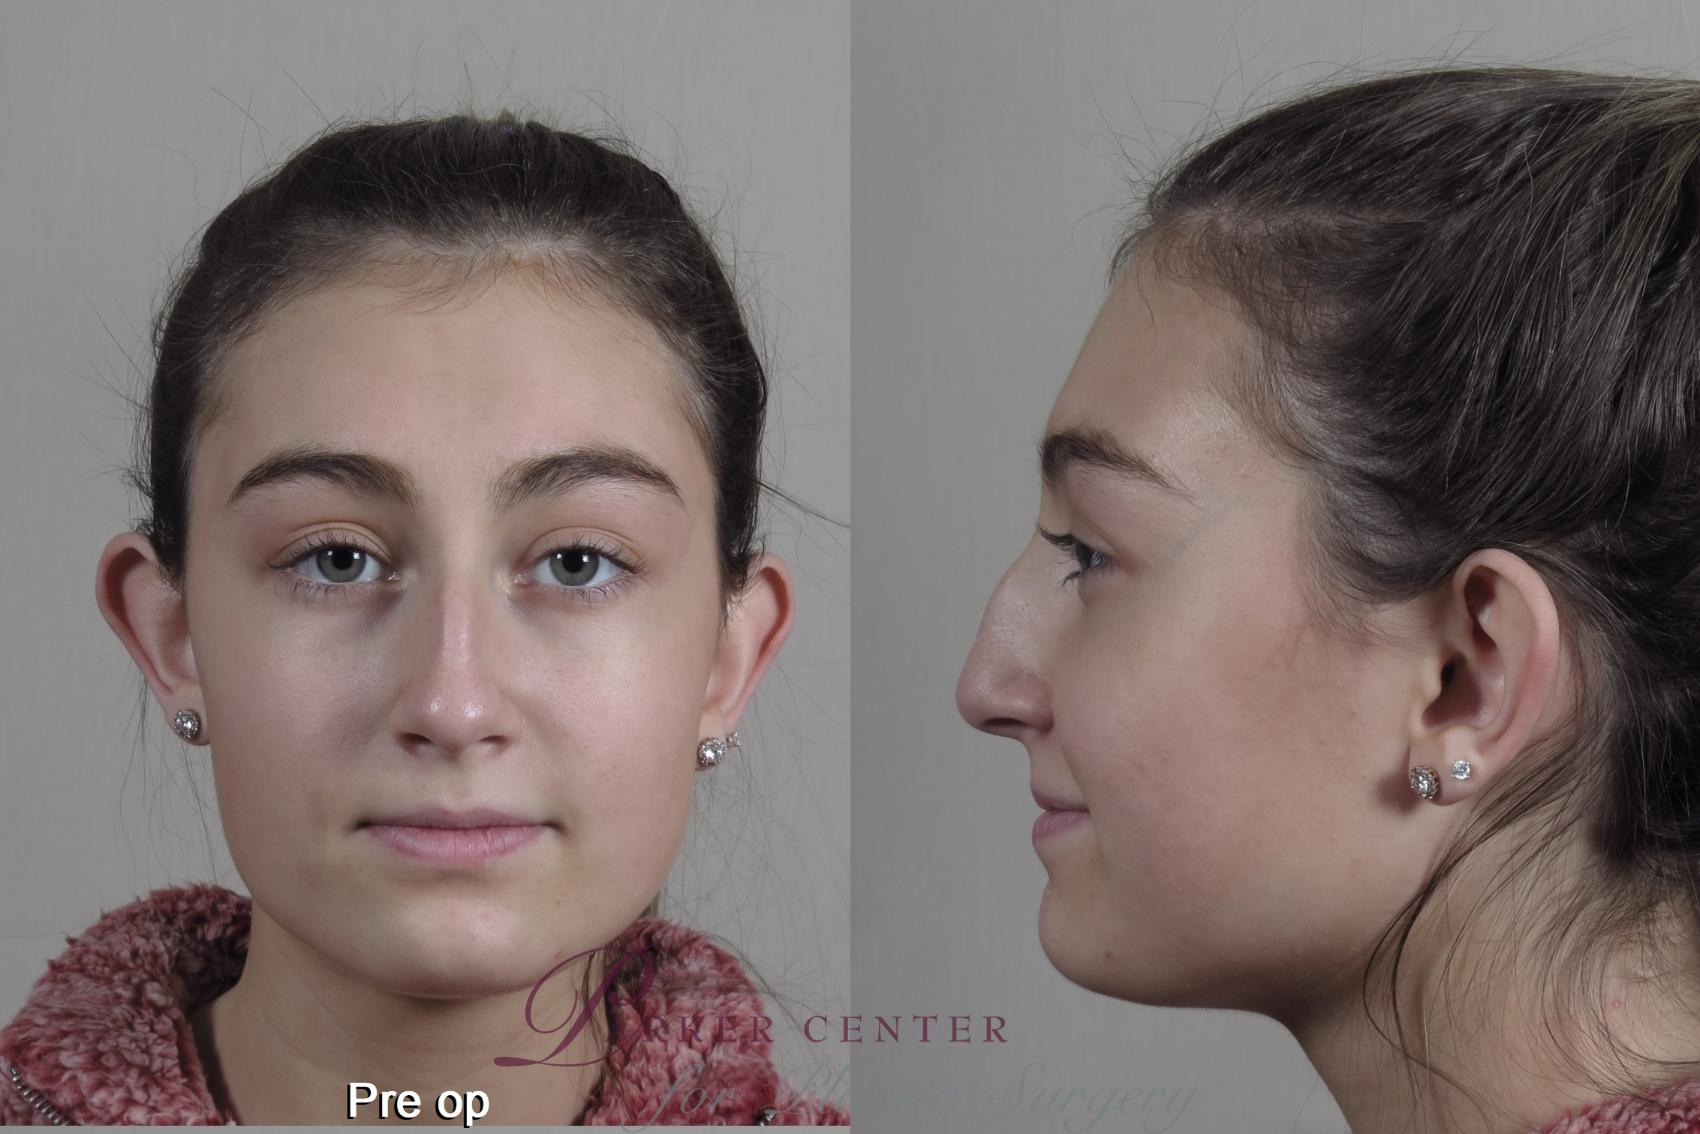 Rhinoplasty Case 1350 Before & After pre op  | Paramus, New Jersey | Parker Center for Plastic Surgery